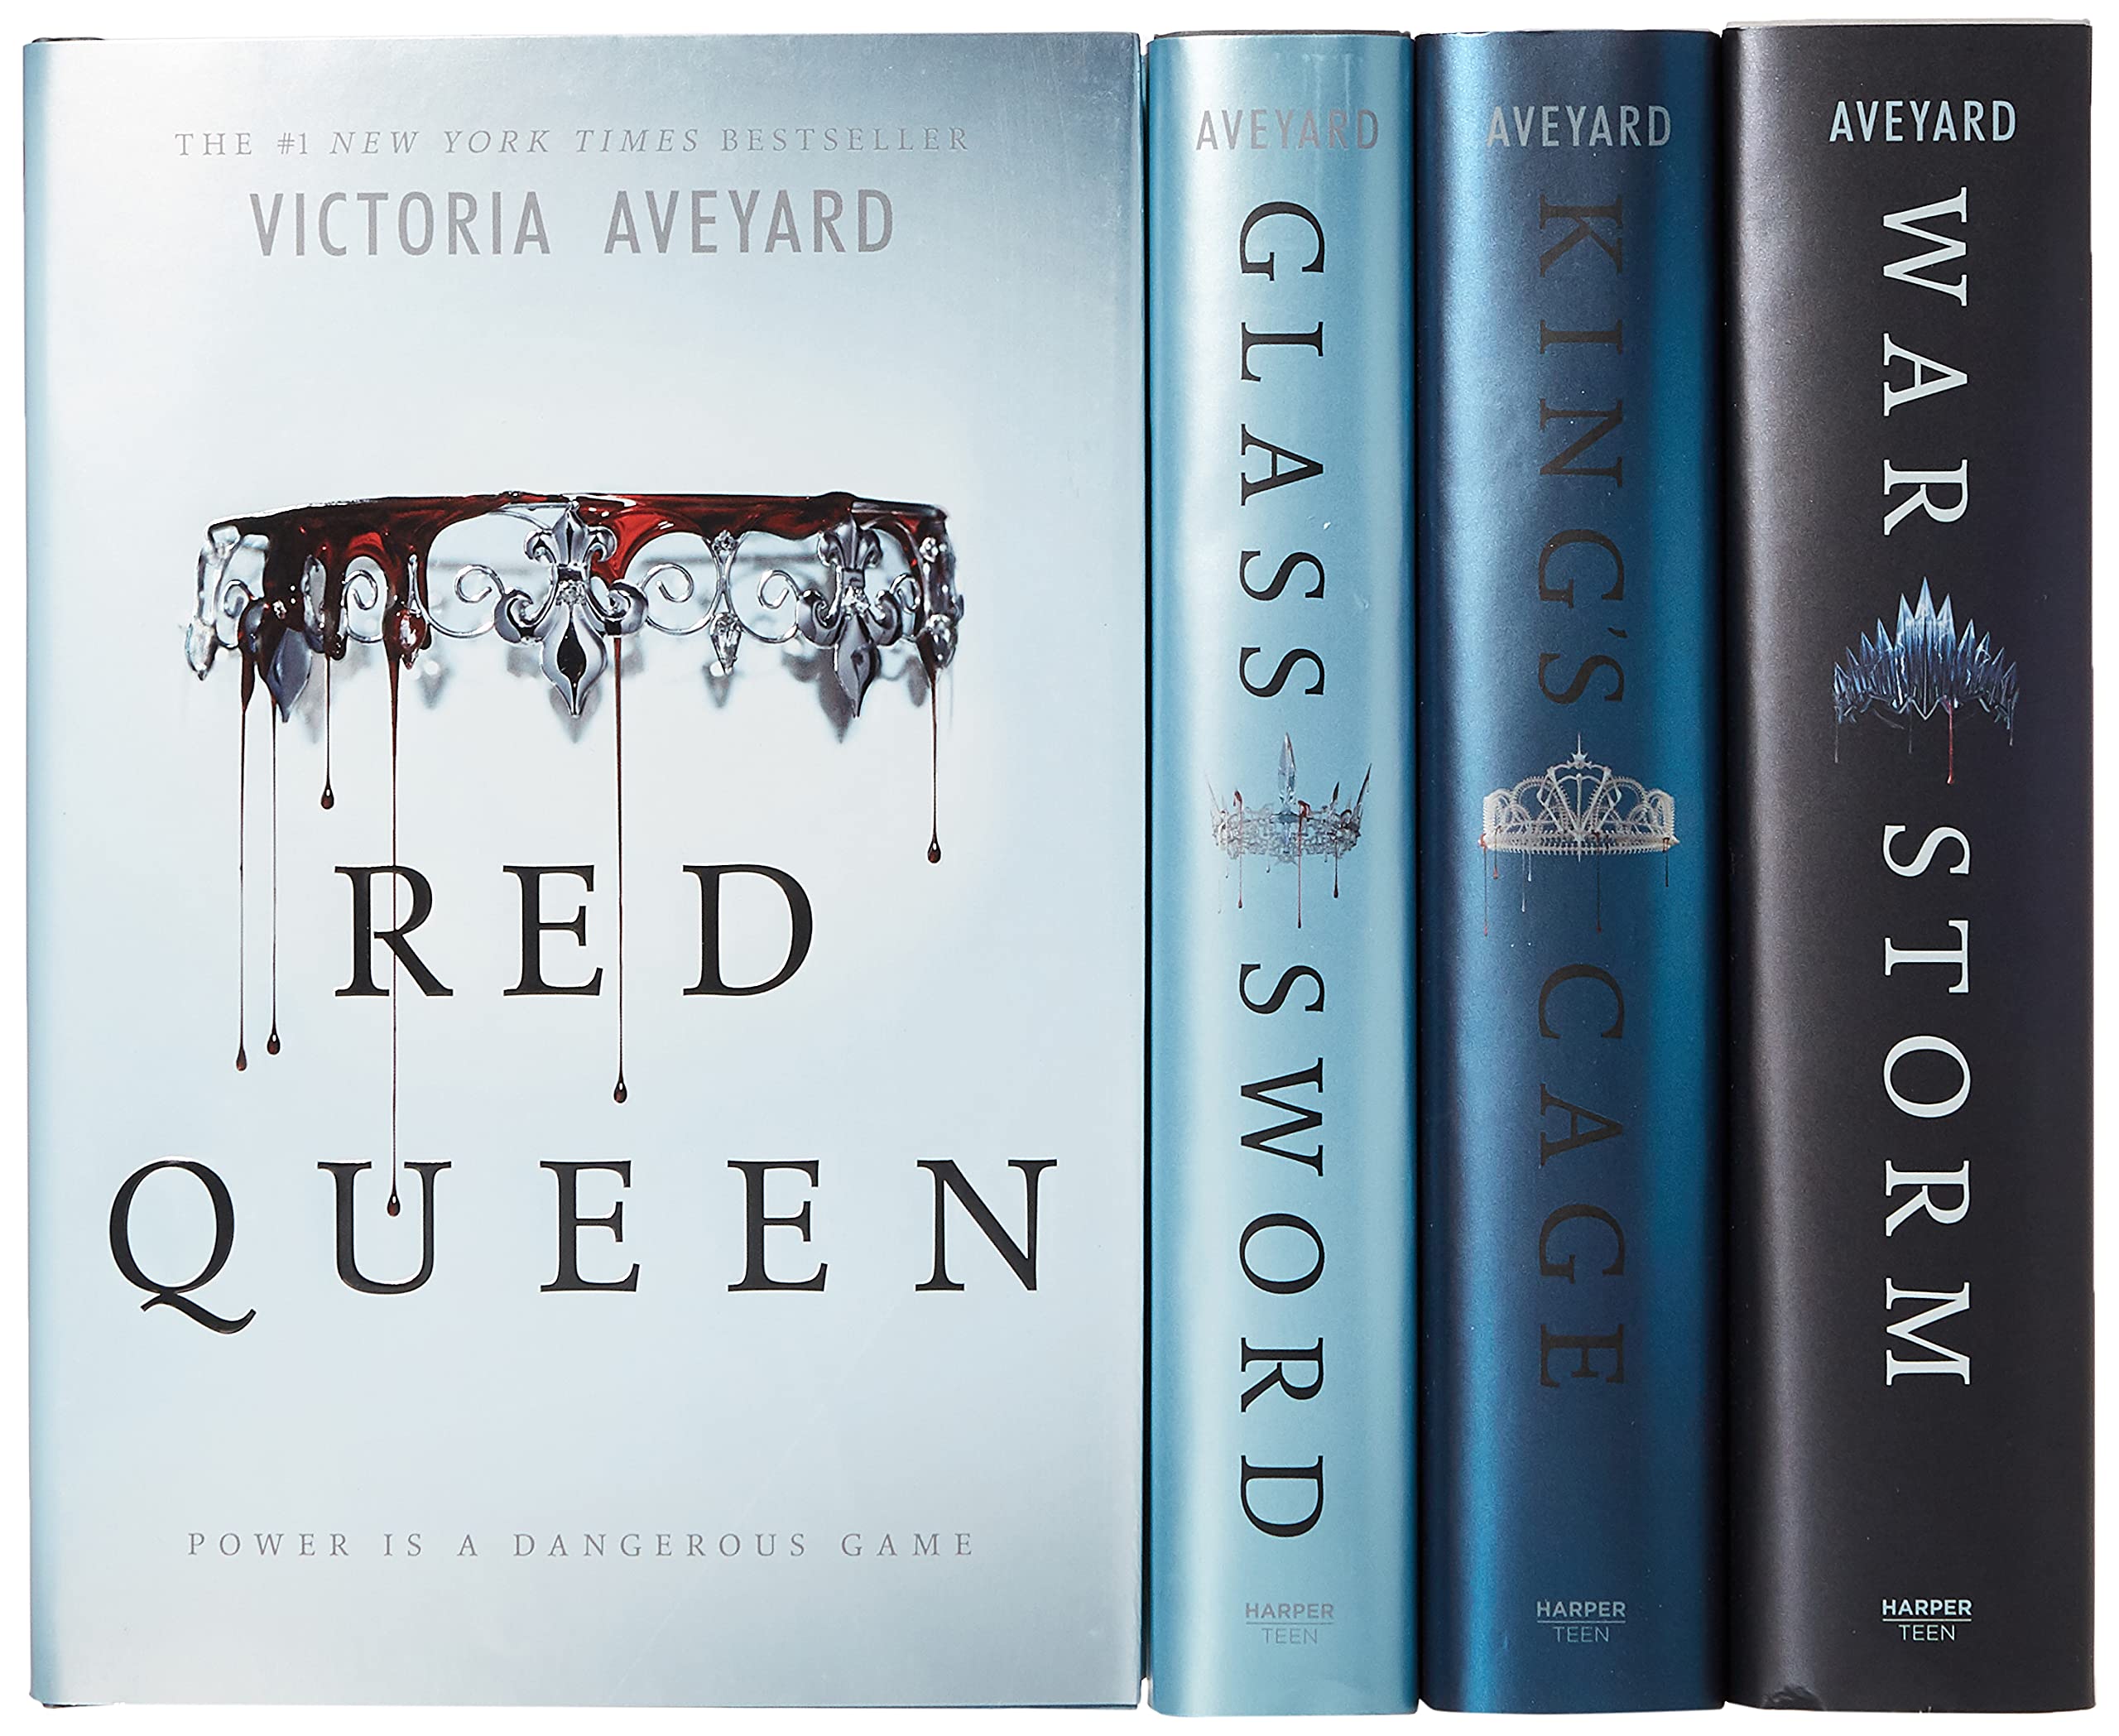 Red Queen 4-Book Hardcover Box Set: Books 1-4 | Victoria Aveyard